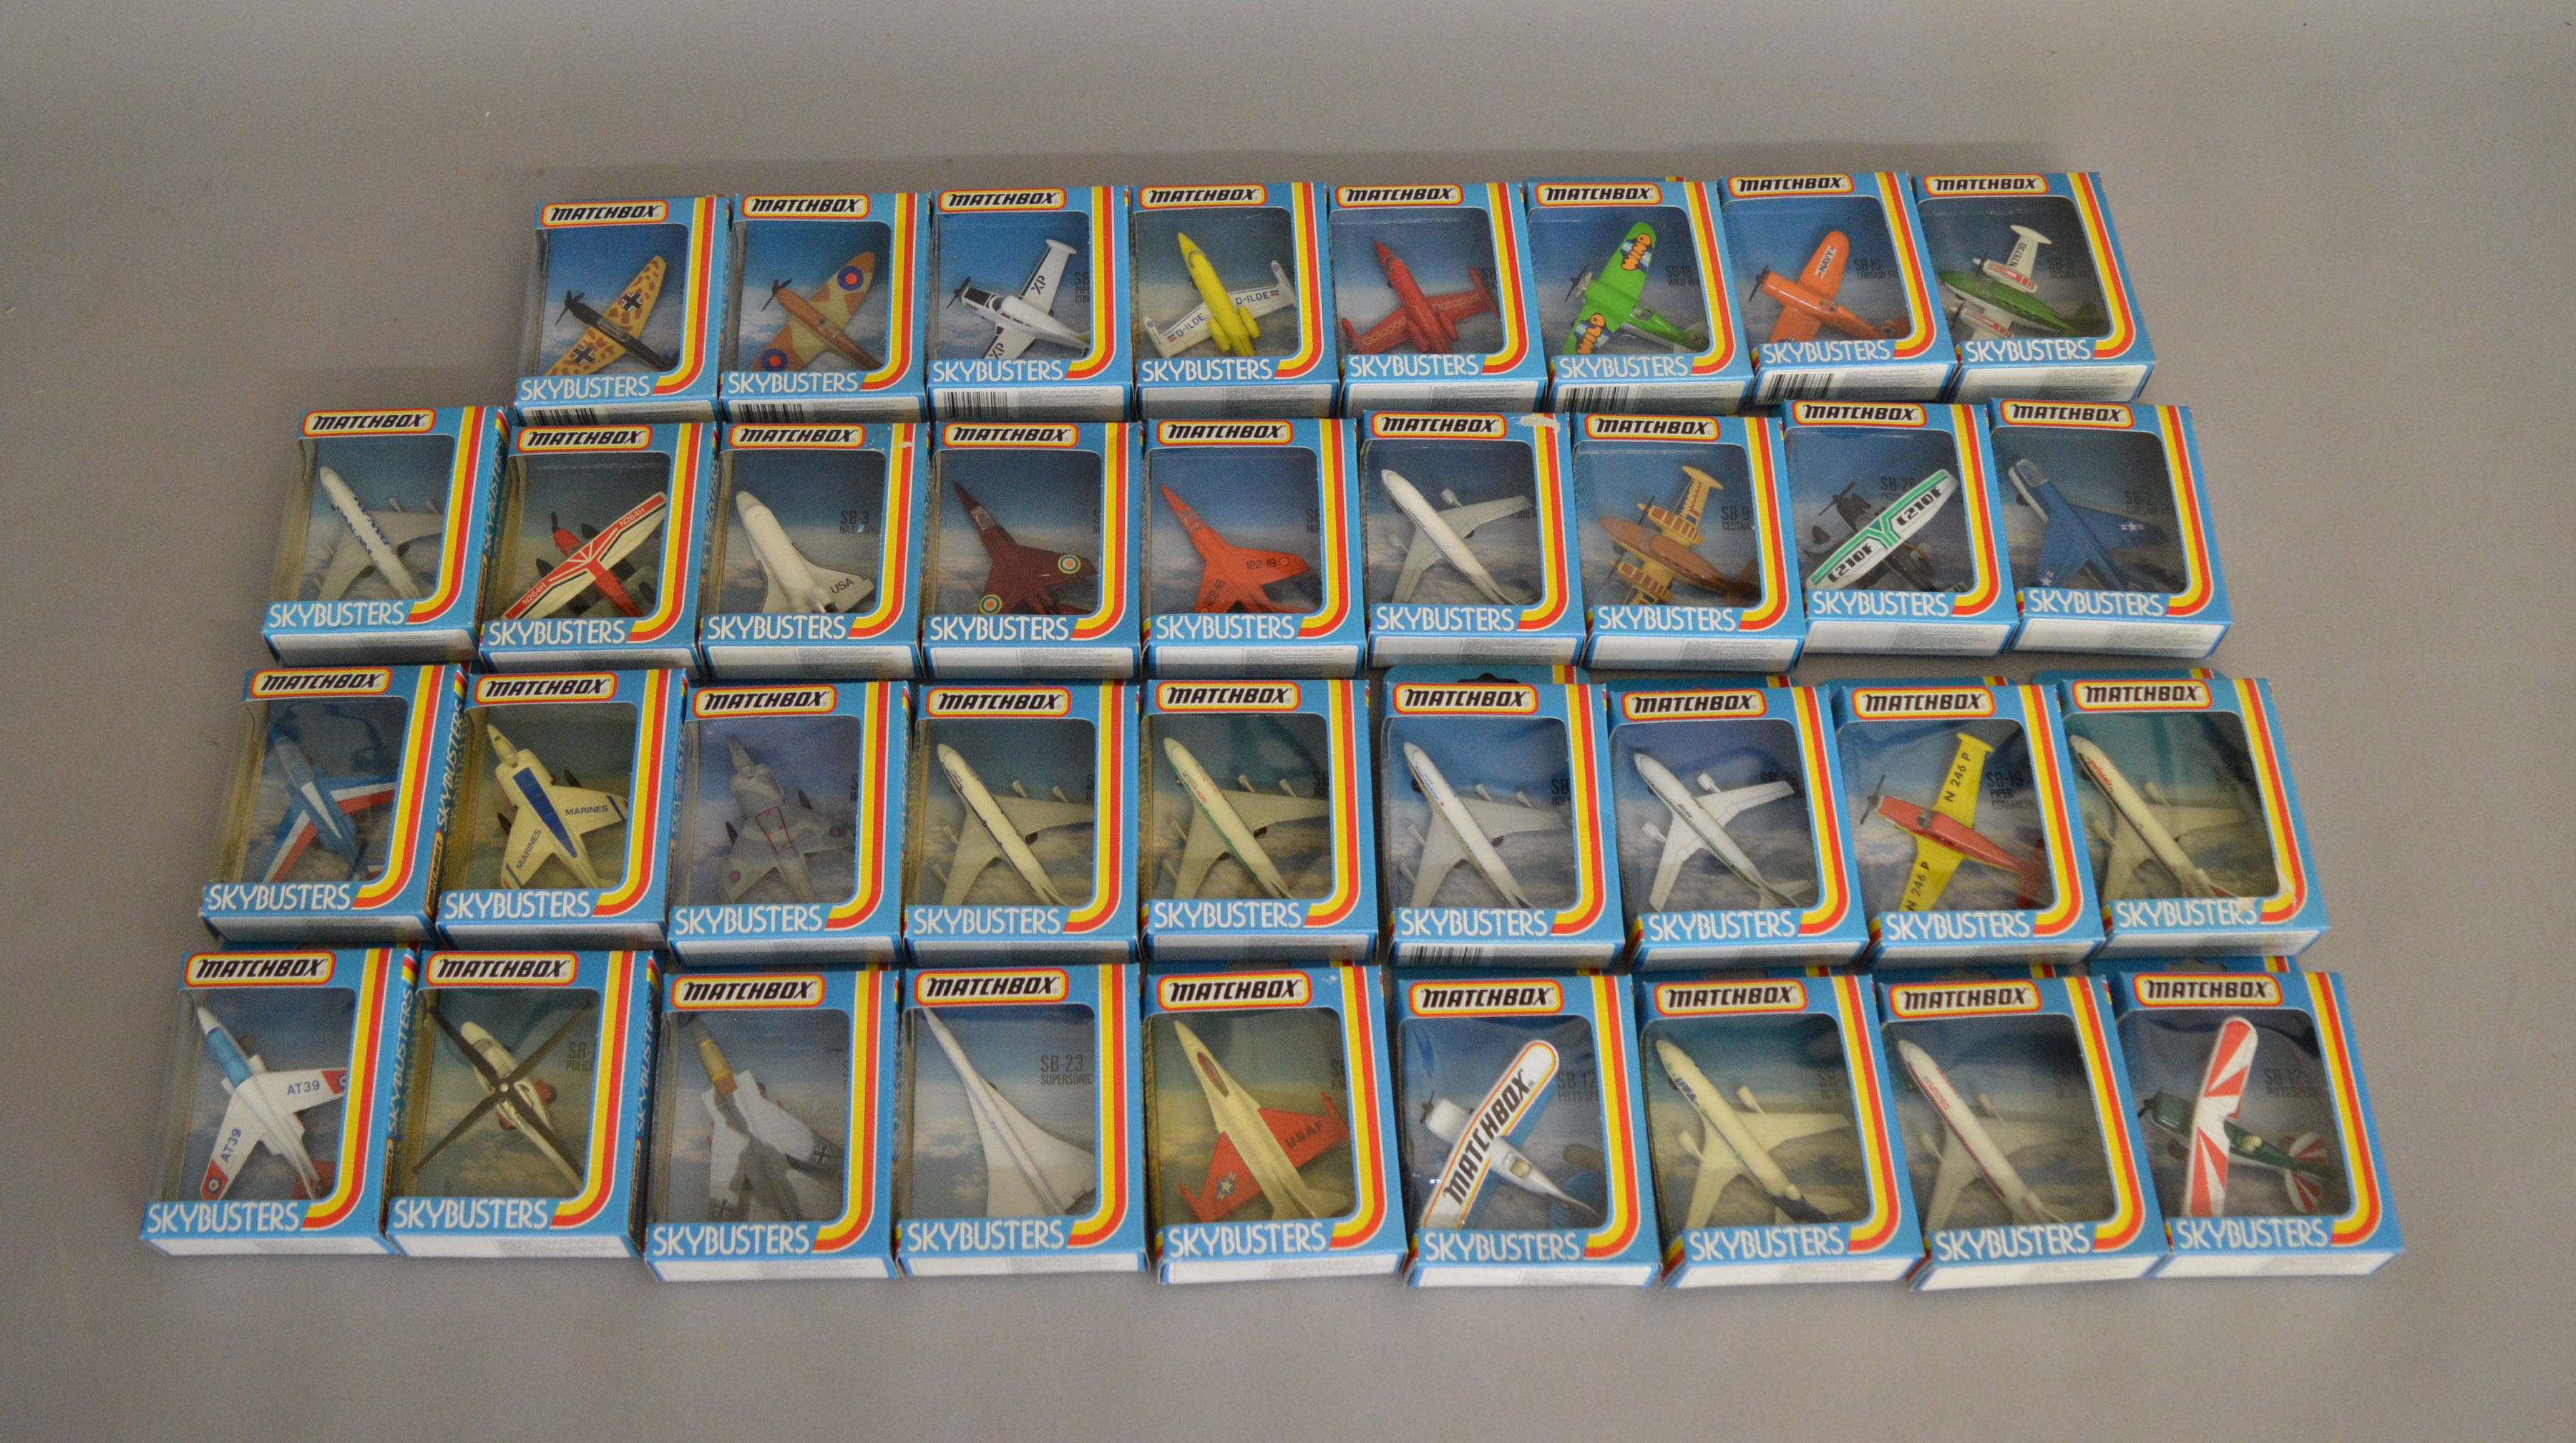 35 Matchbox models from the 'Skybusters' range, all in window box packaging, including SB-16 Corsair